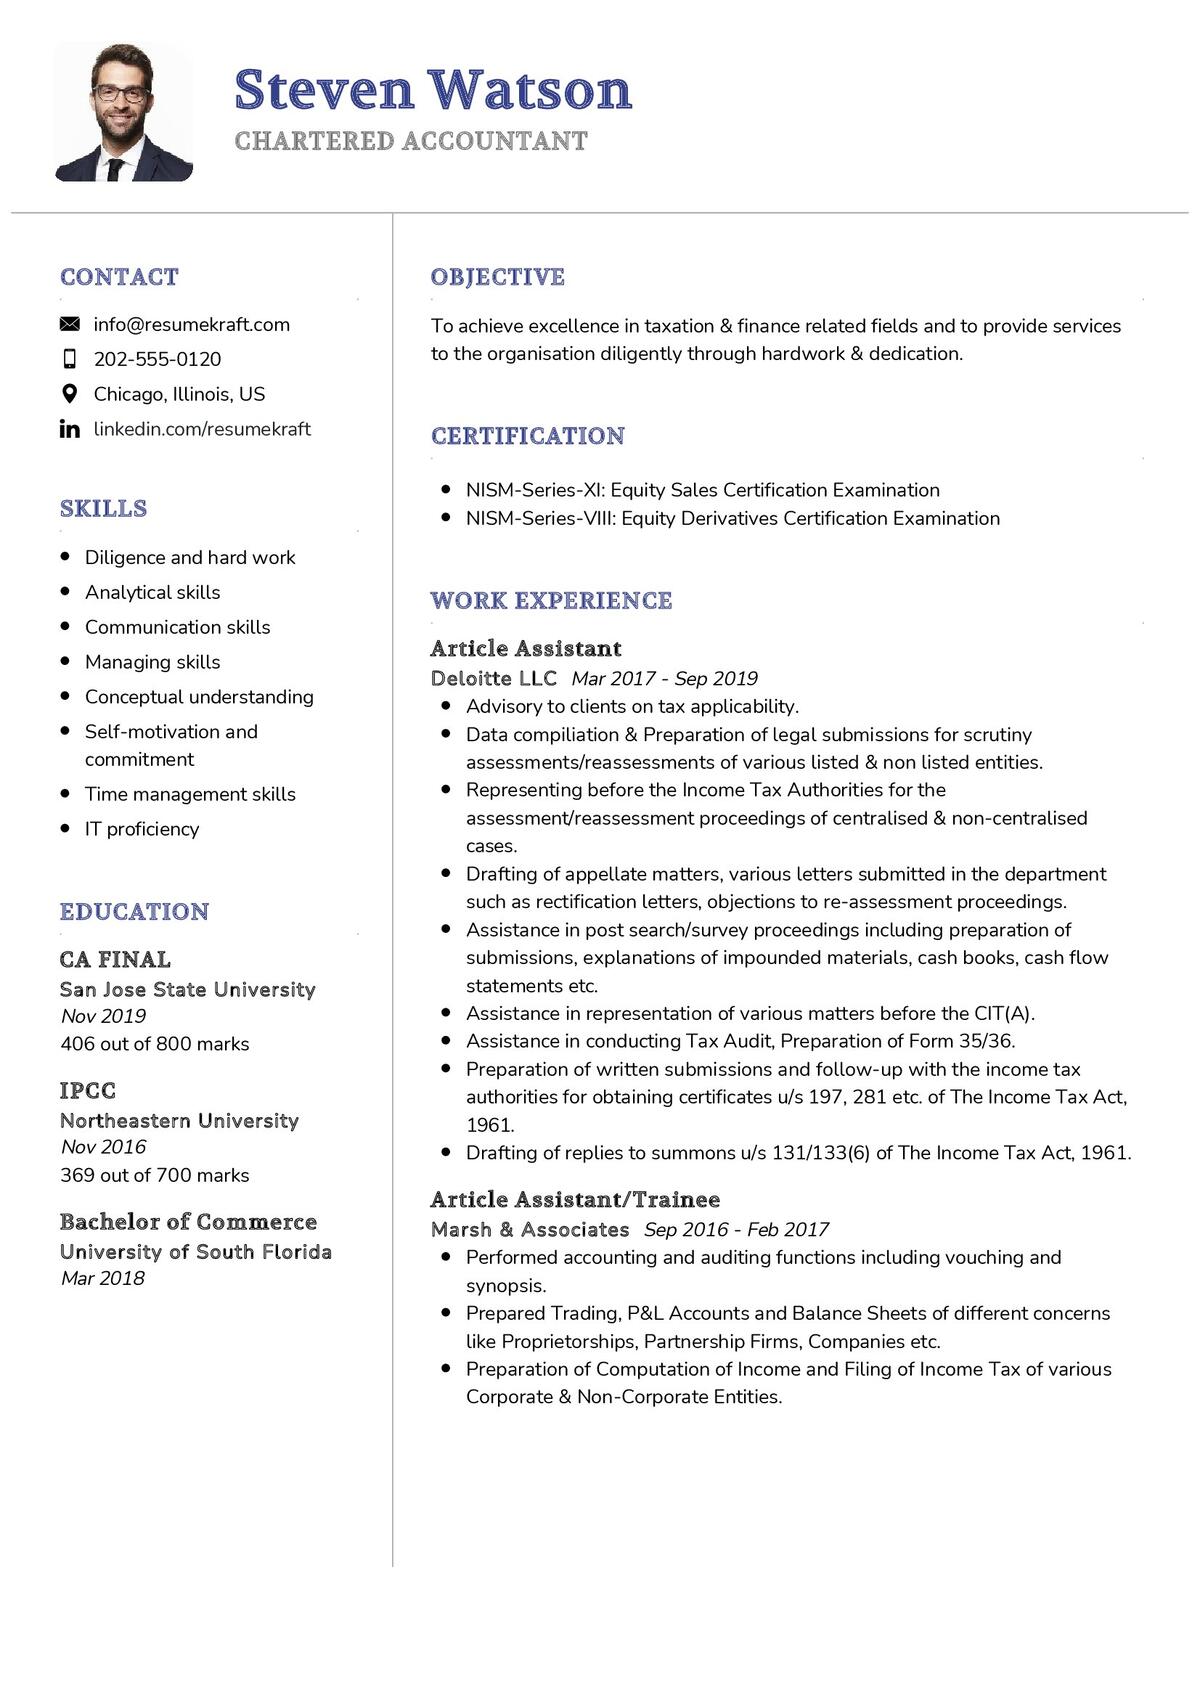 Chartered Accountant CV Example 